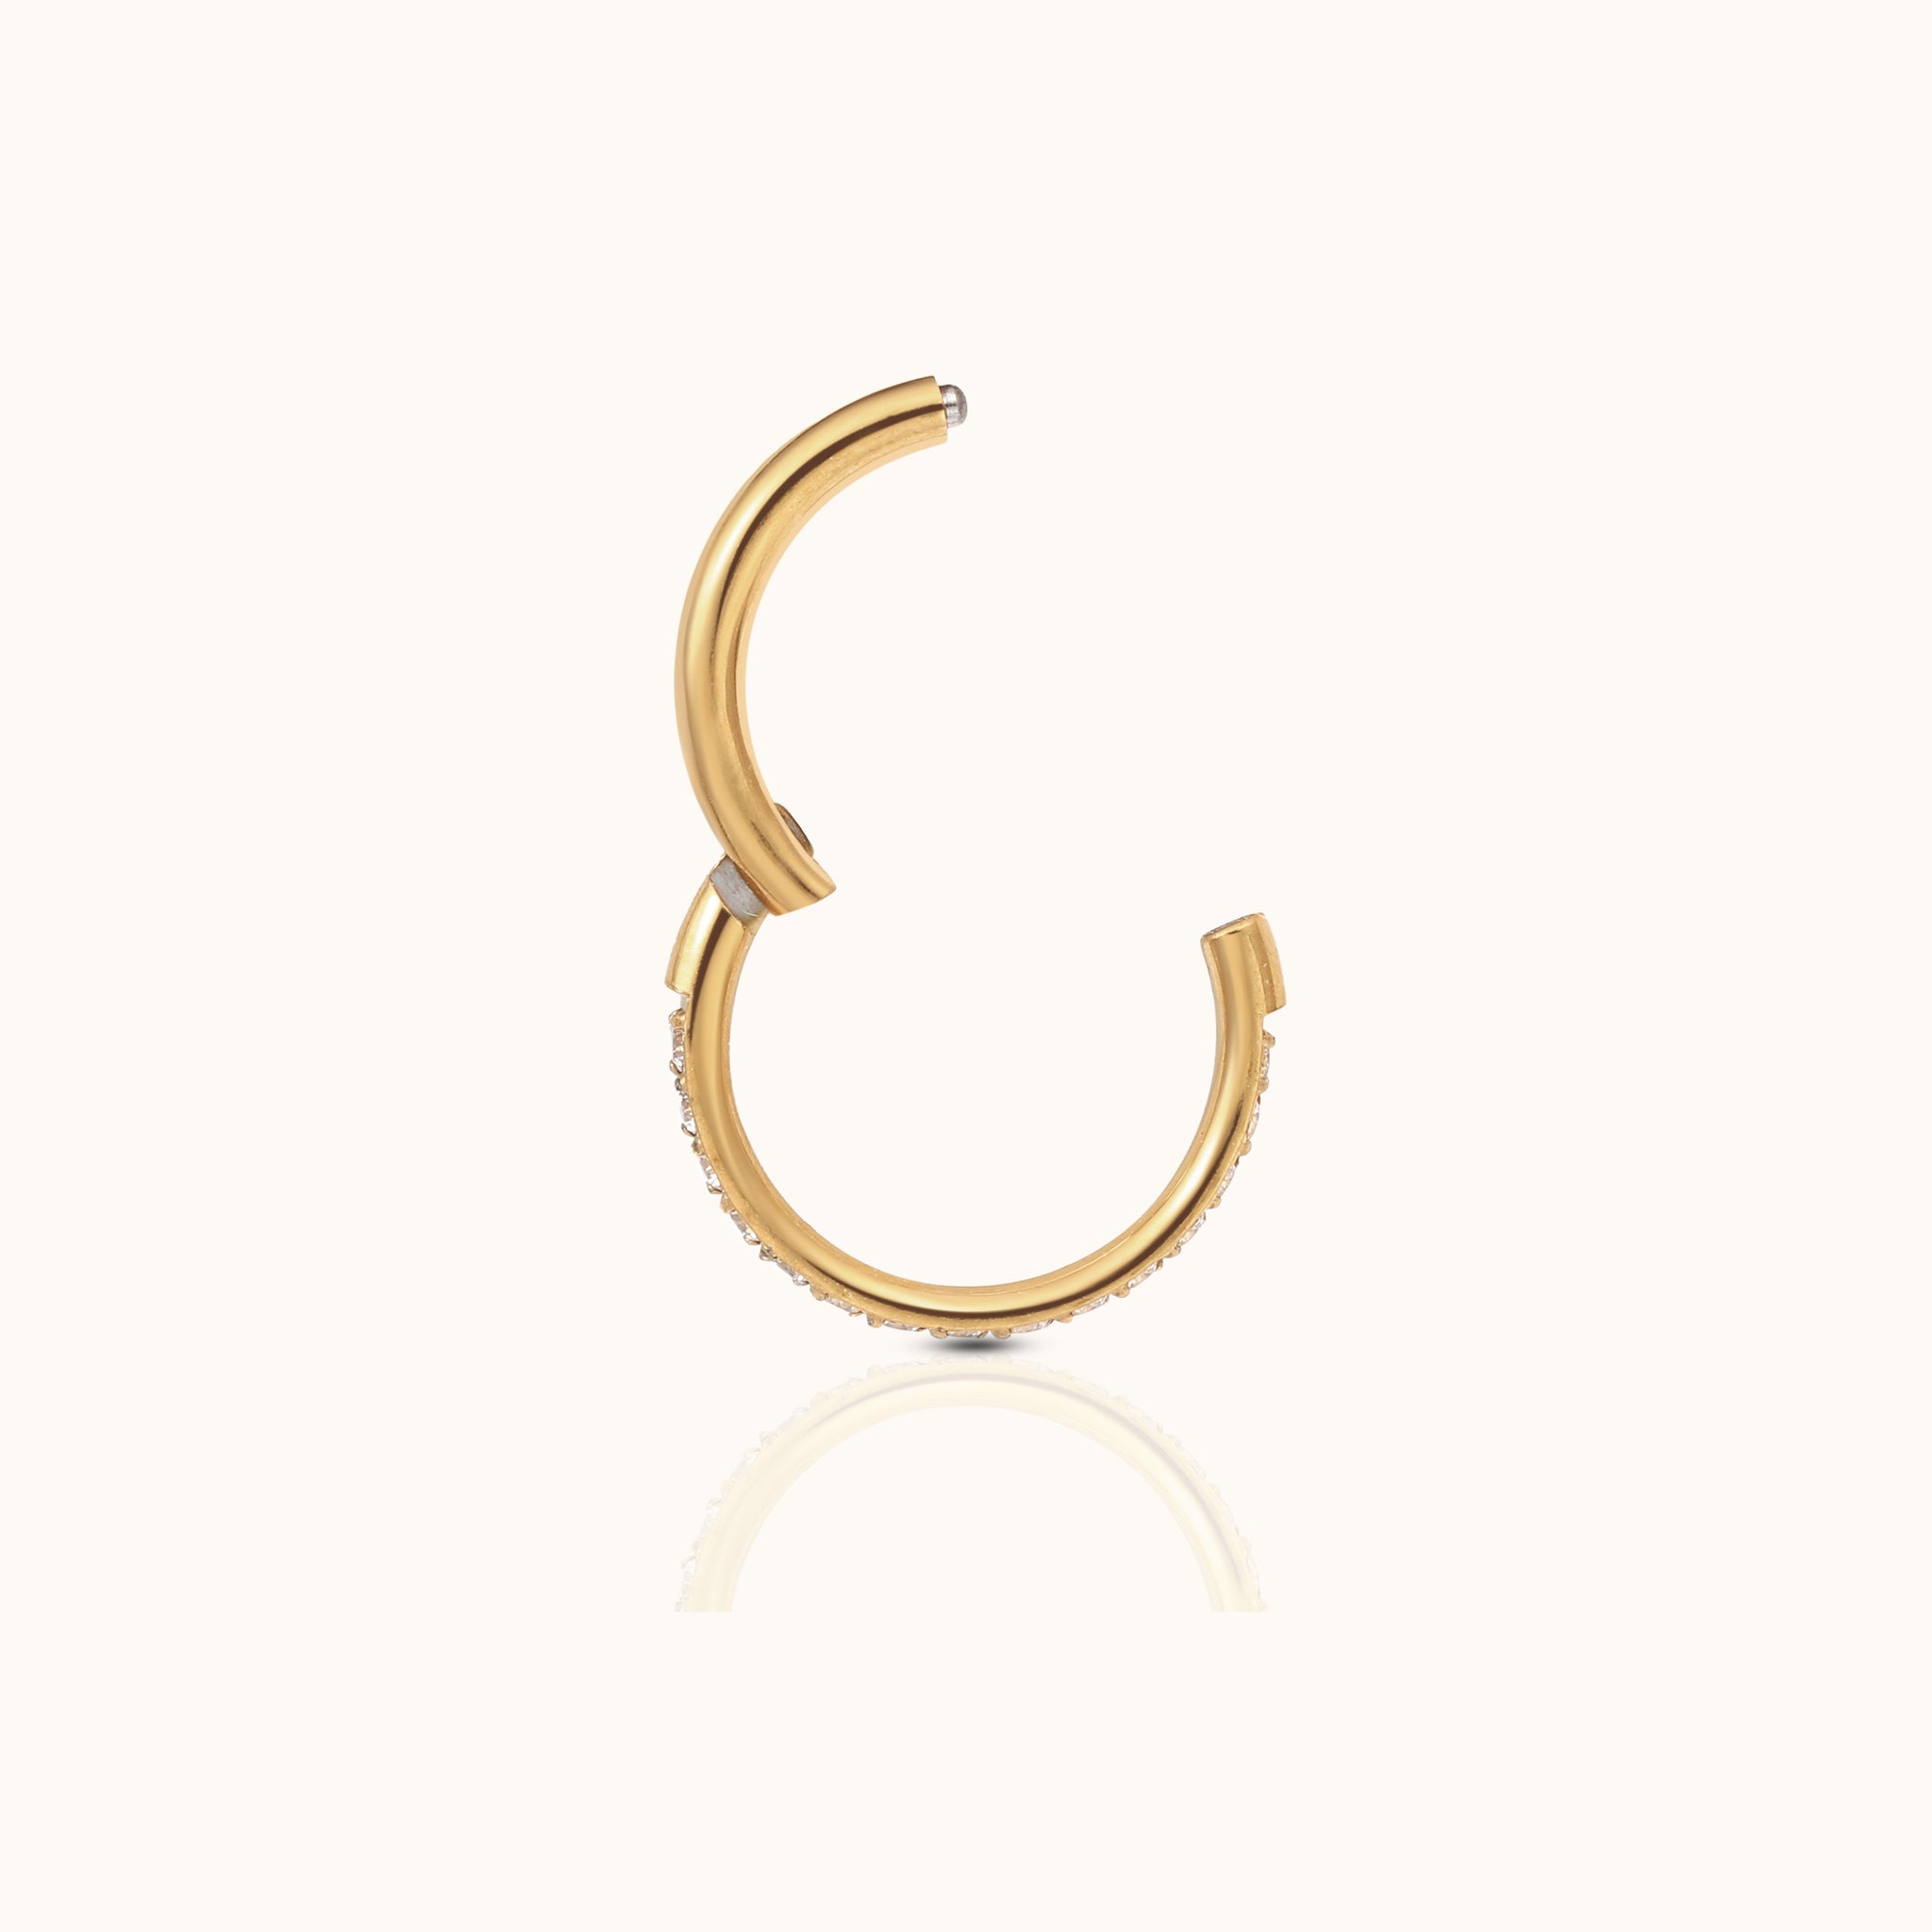 Classic CZ Clicker 6mm Titanium PVD Gold Hinged Nap Hoop Earring by Doviana